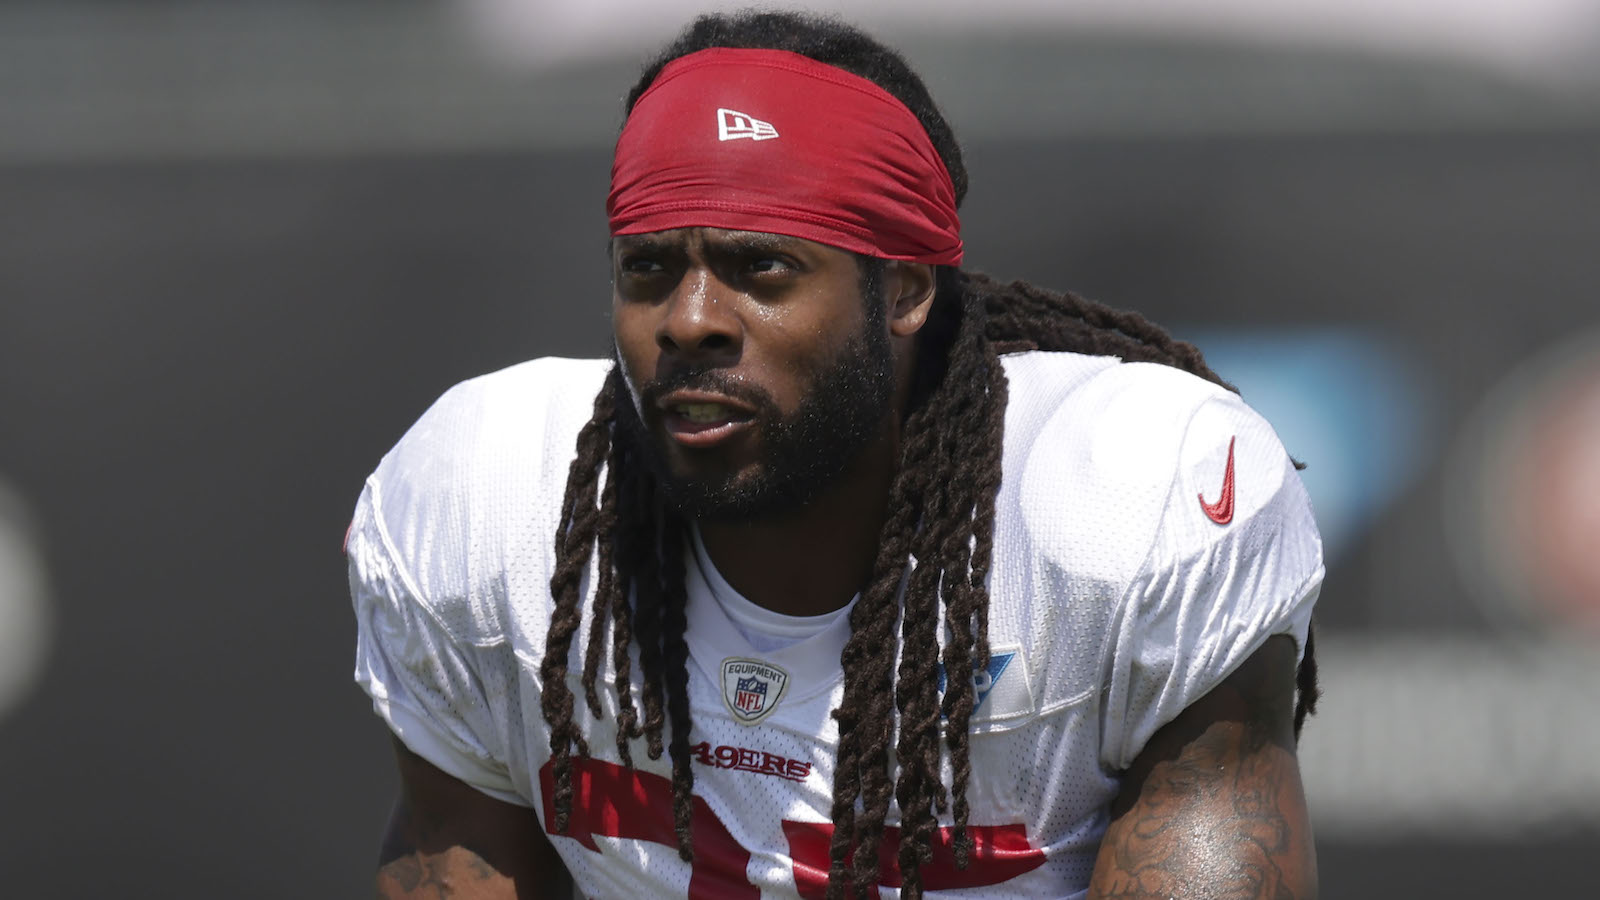 Report: Richard Sherman ‘deep in talks’ for big broadcasting role